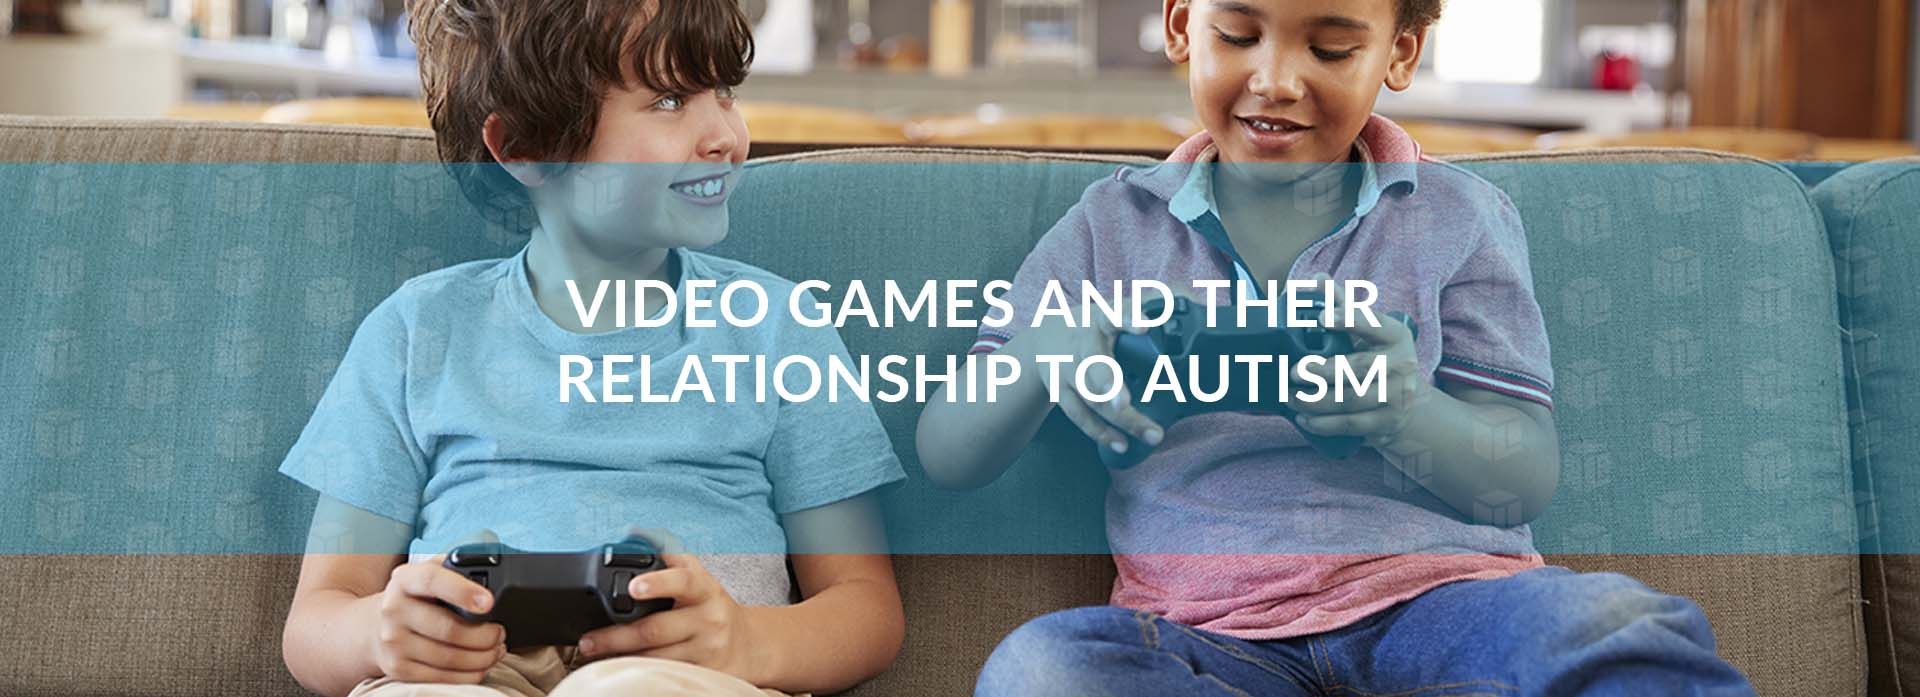 Video Games And Their Relationship To Autism Video Games And Their Relationship To Autism Video Games And Their Relationship To Autism Video Games And Their Relationship To Autism